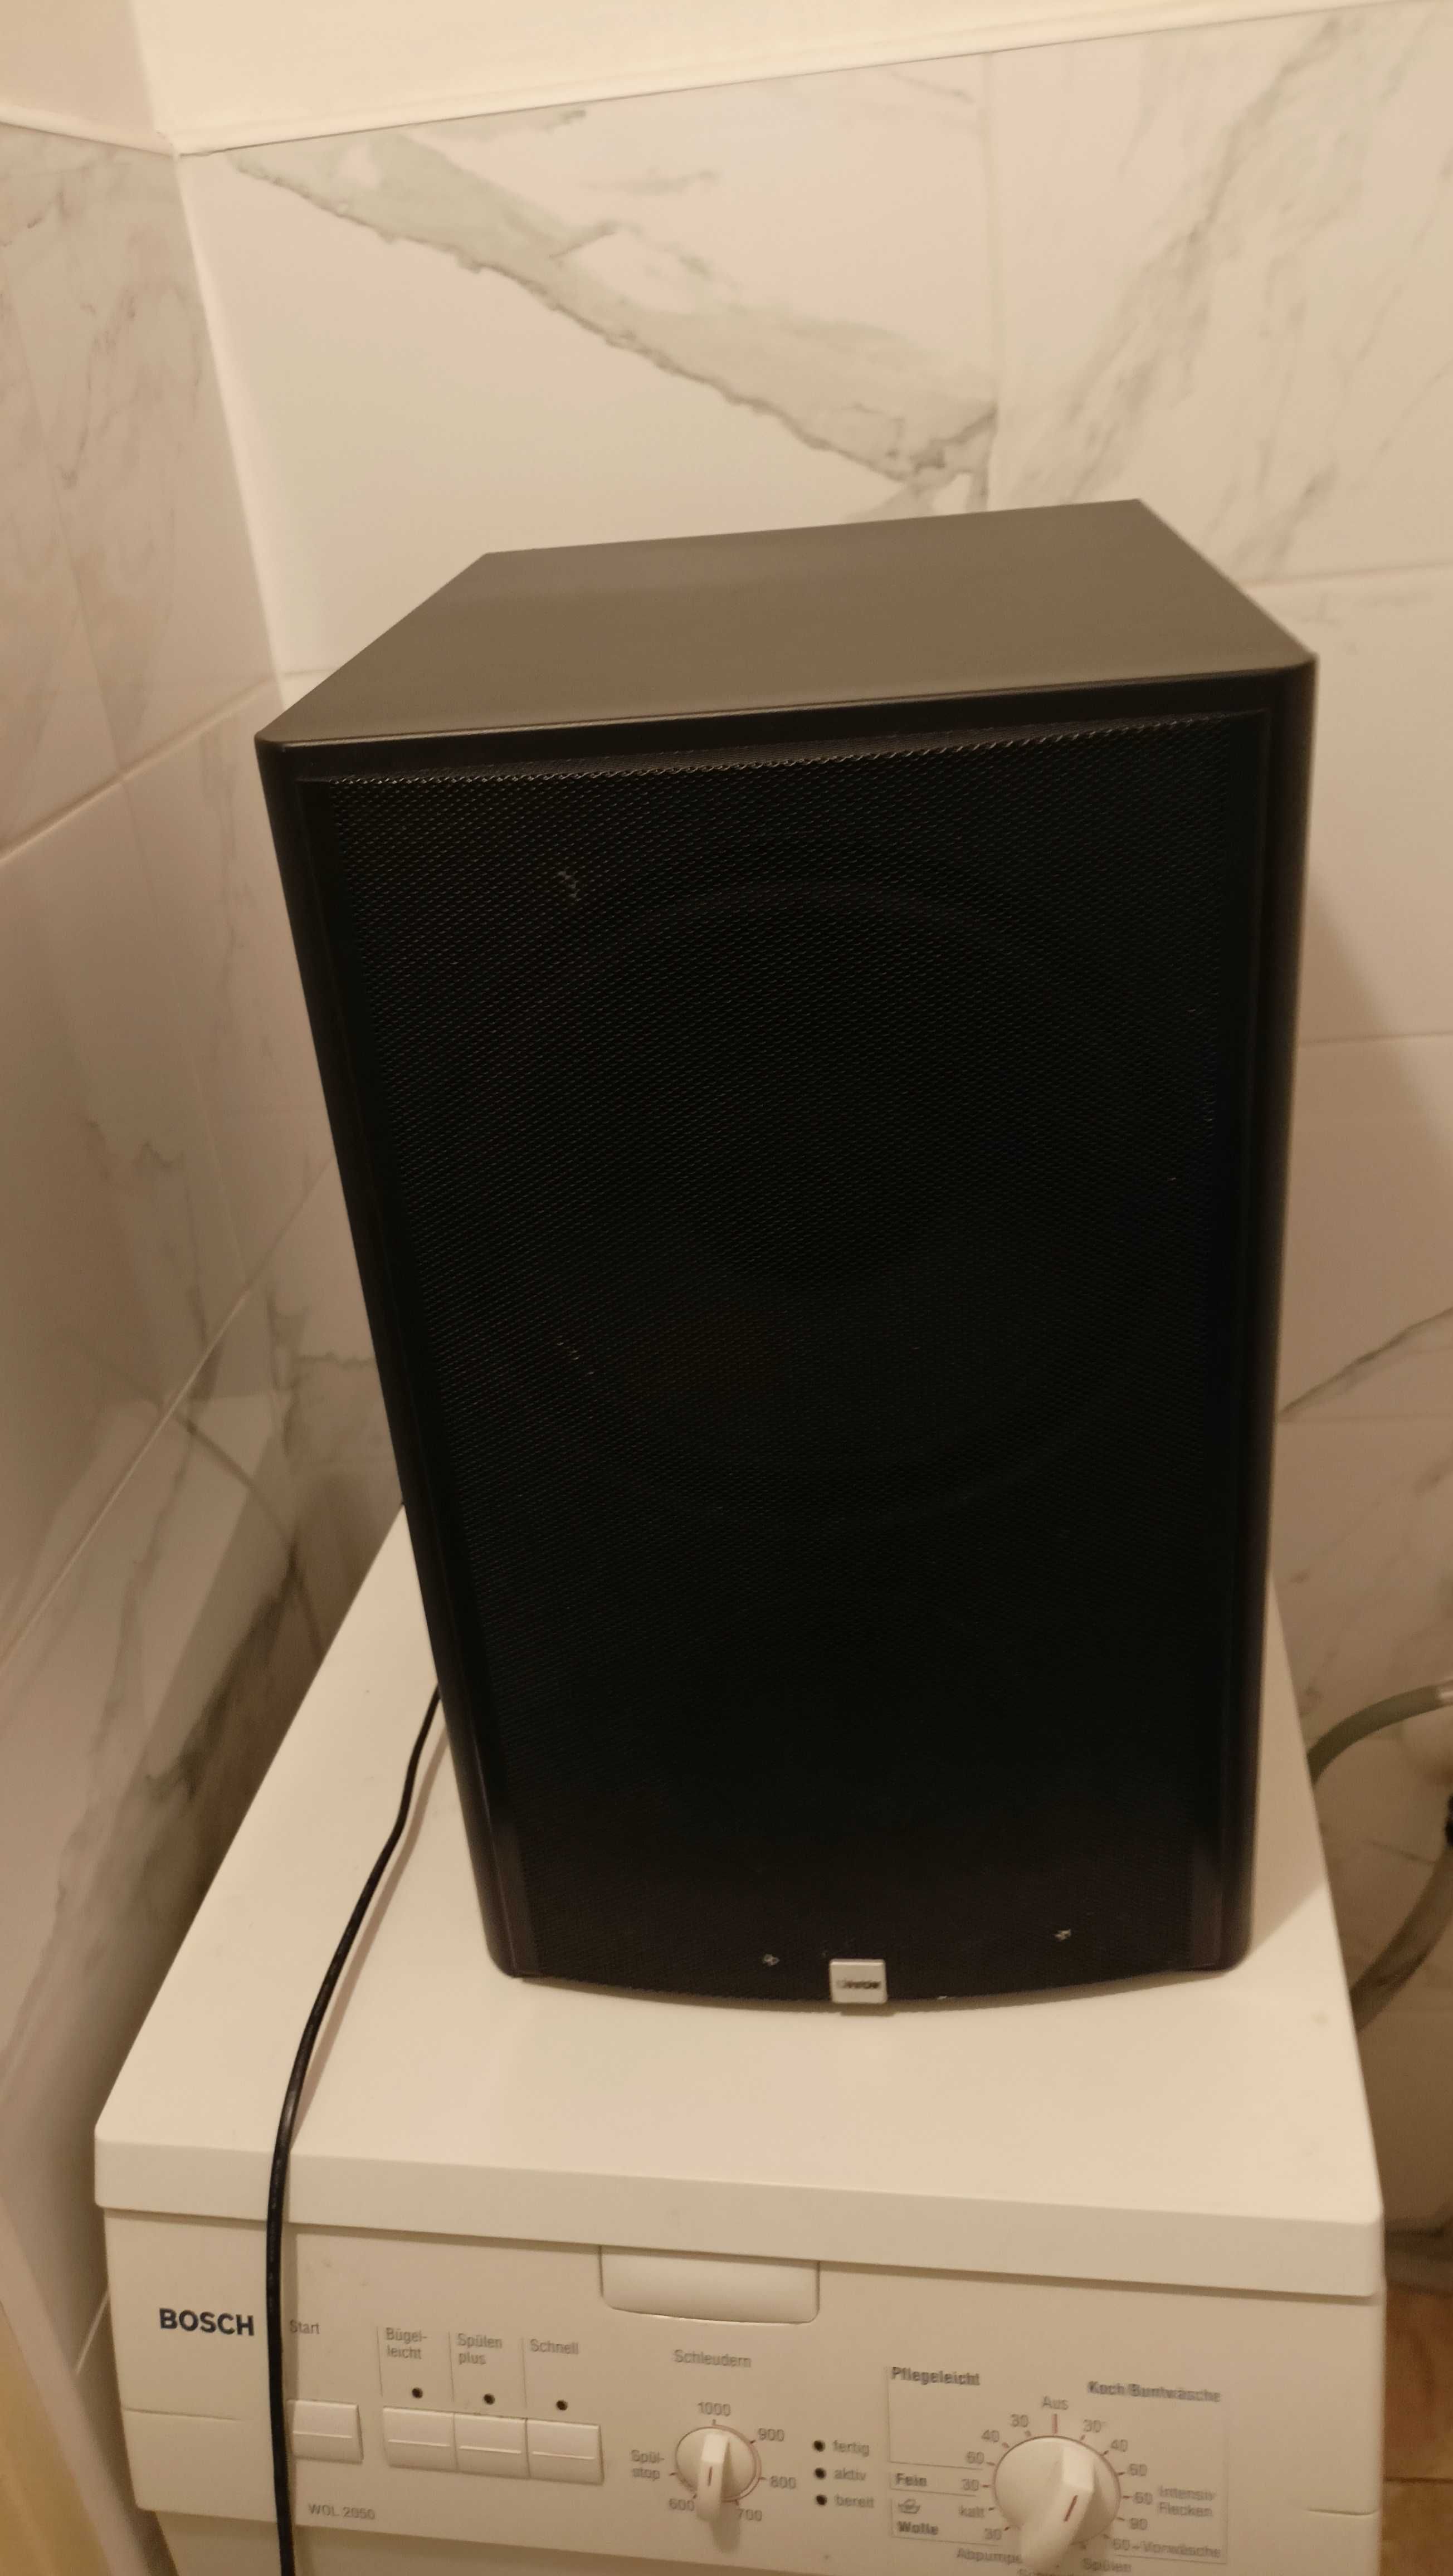 Canton AS 25 Subwoofer aktywny